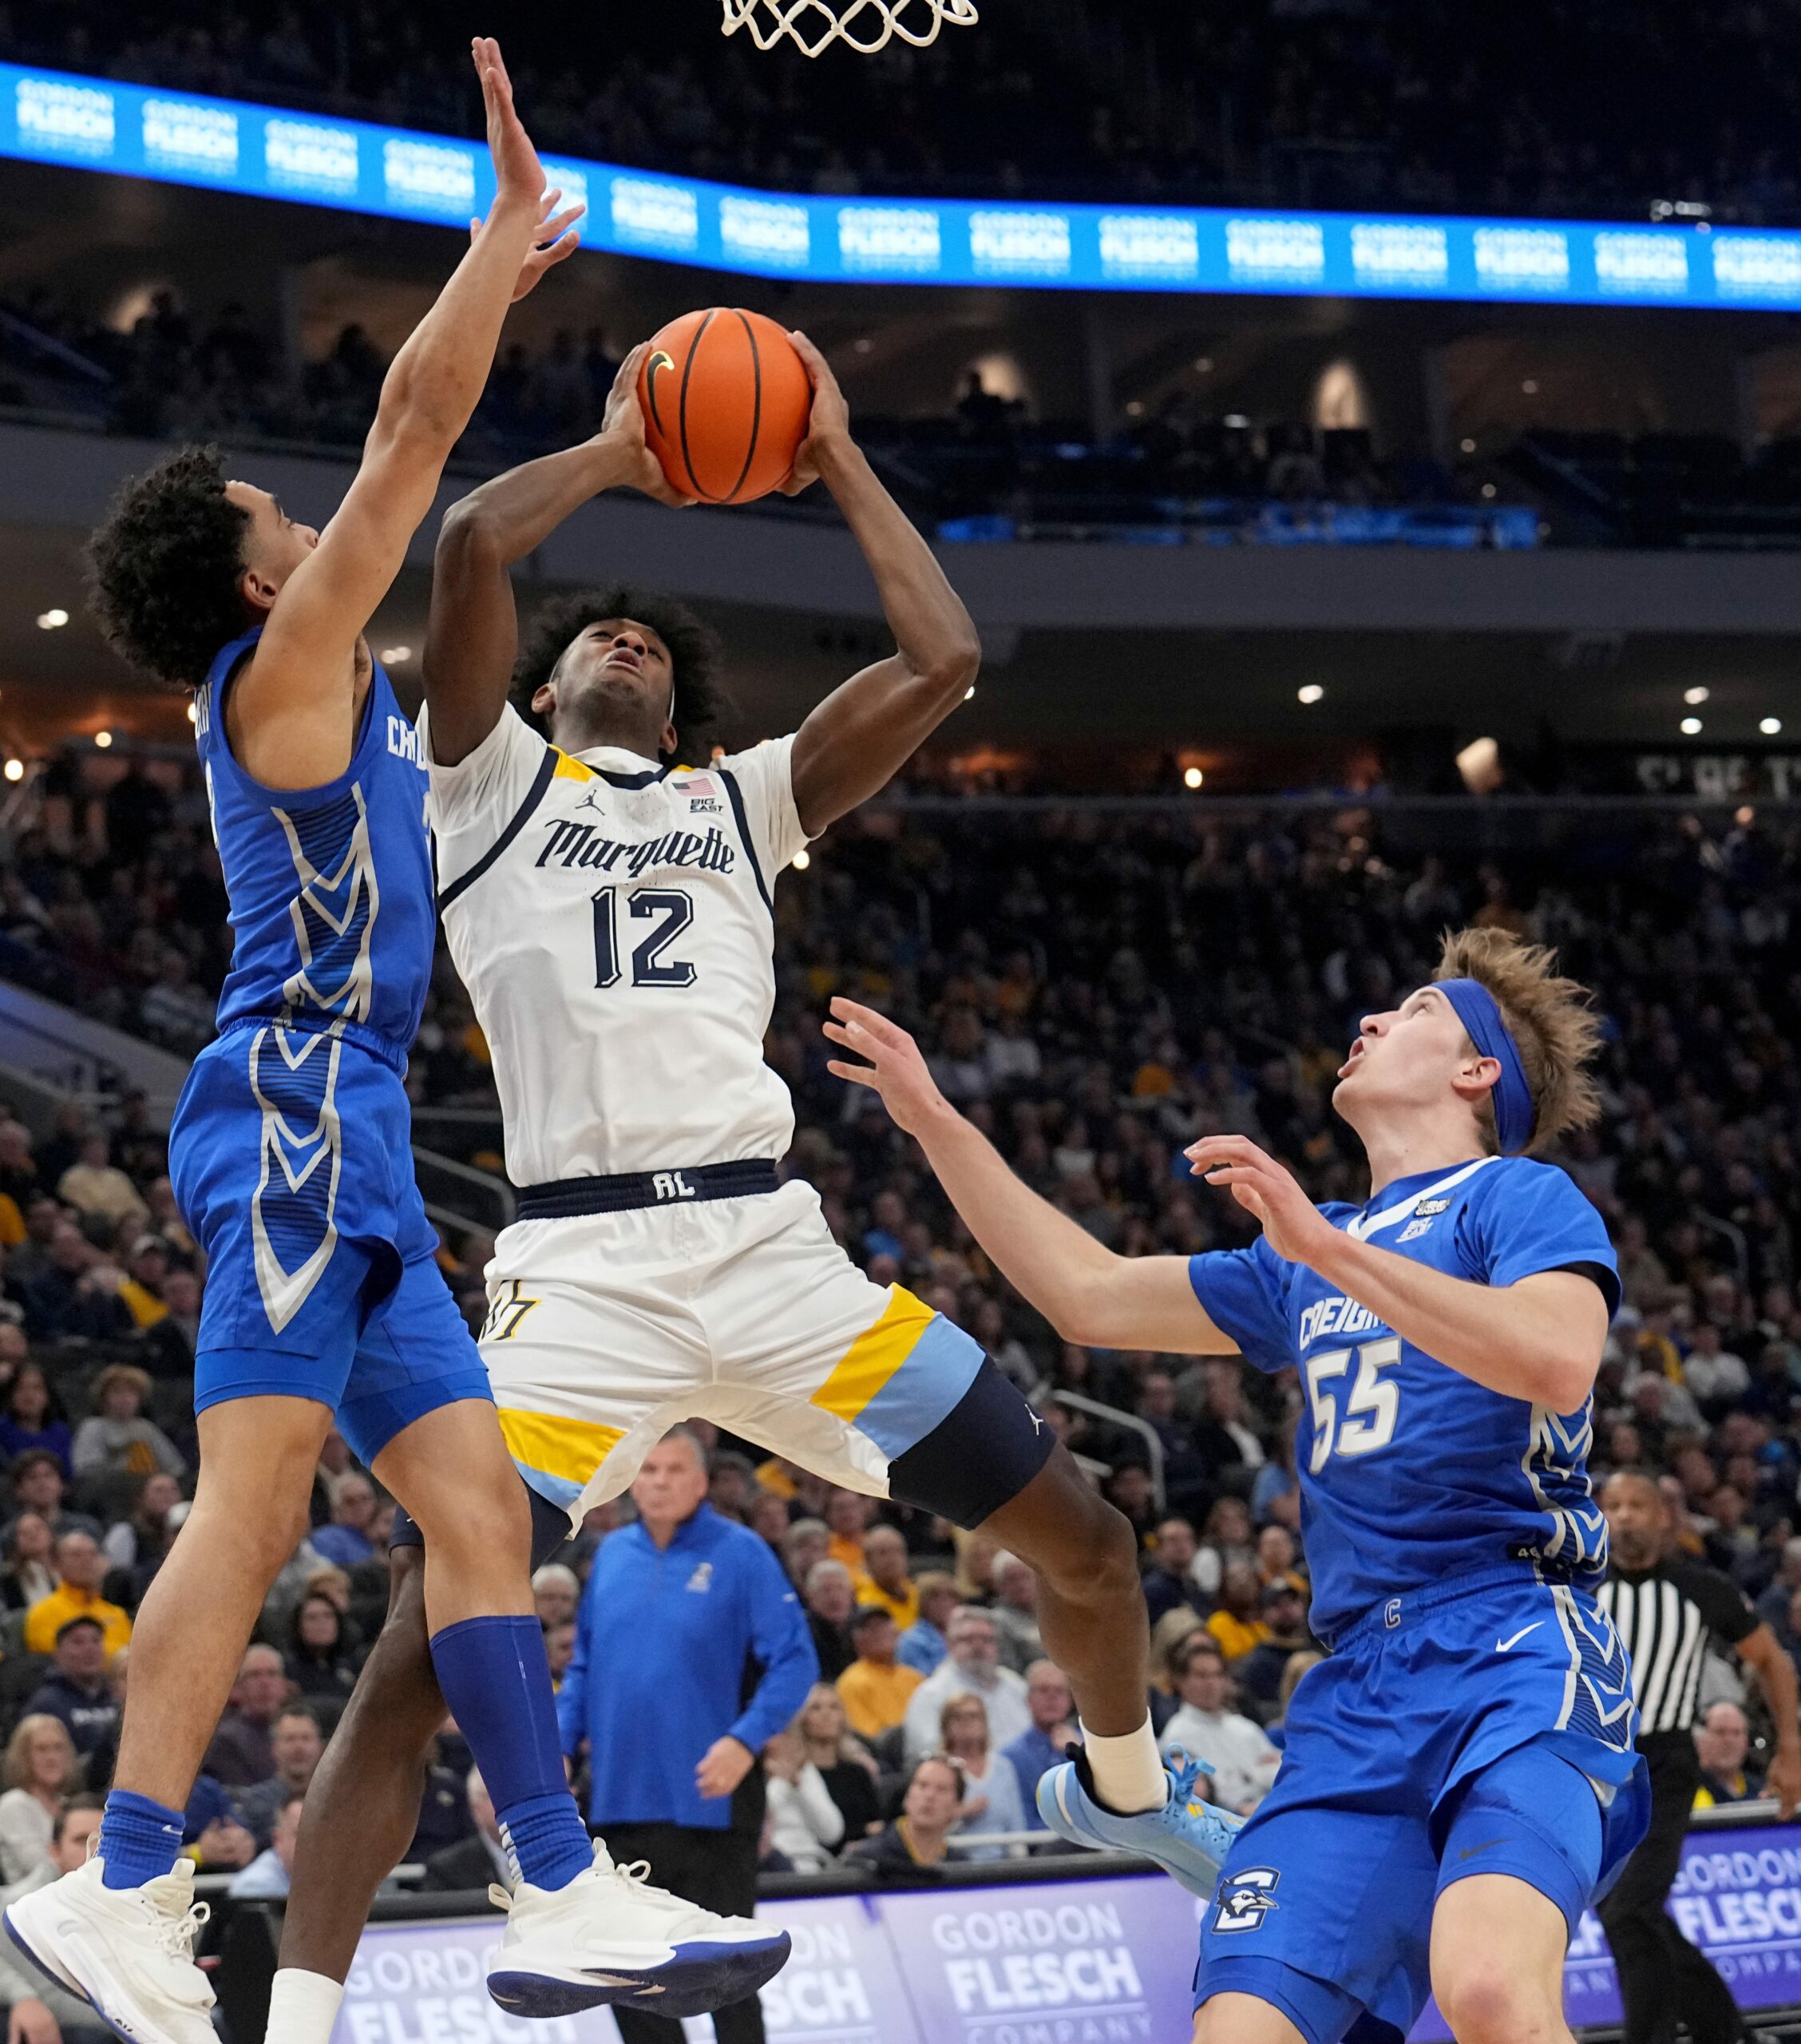 Marquette vs. Creighton live stream, TV channel, time, odds, how to watch college basketball